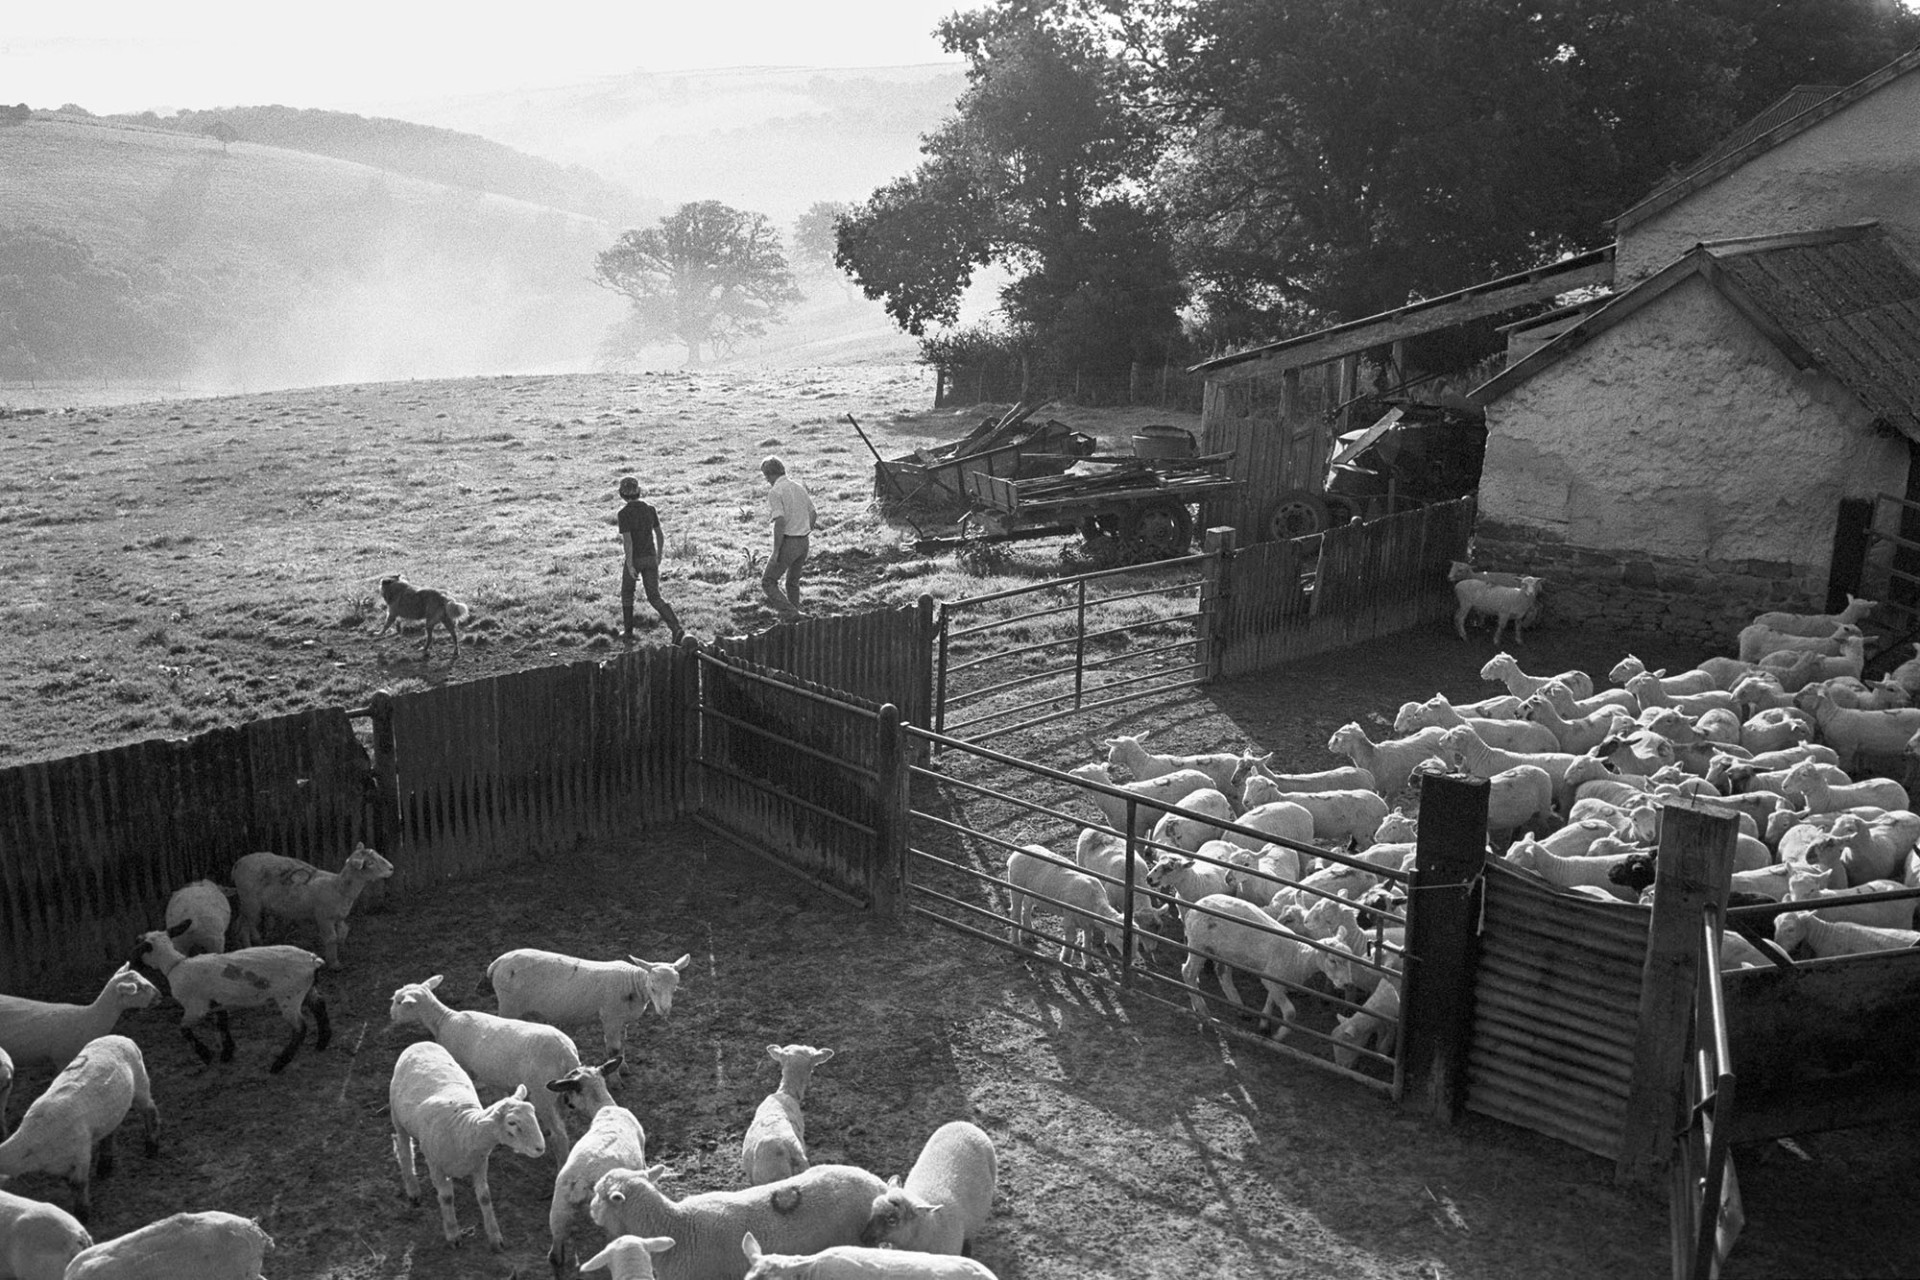 Misty landscape with sheep shepherds setting out to find missing lambs. Early morning.
[Mr Cole and another man with a dog setting off on a misty morning to find missing lambs at Densham, Ashreigney. Sheep are gathered in pens by farm buildings in the foreground and a view of fields and tree can be seen in the distance.]